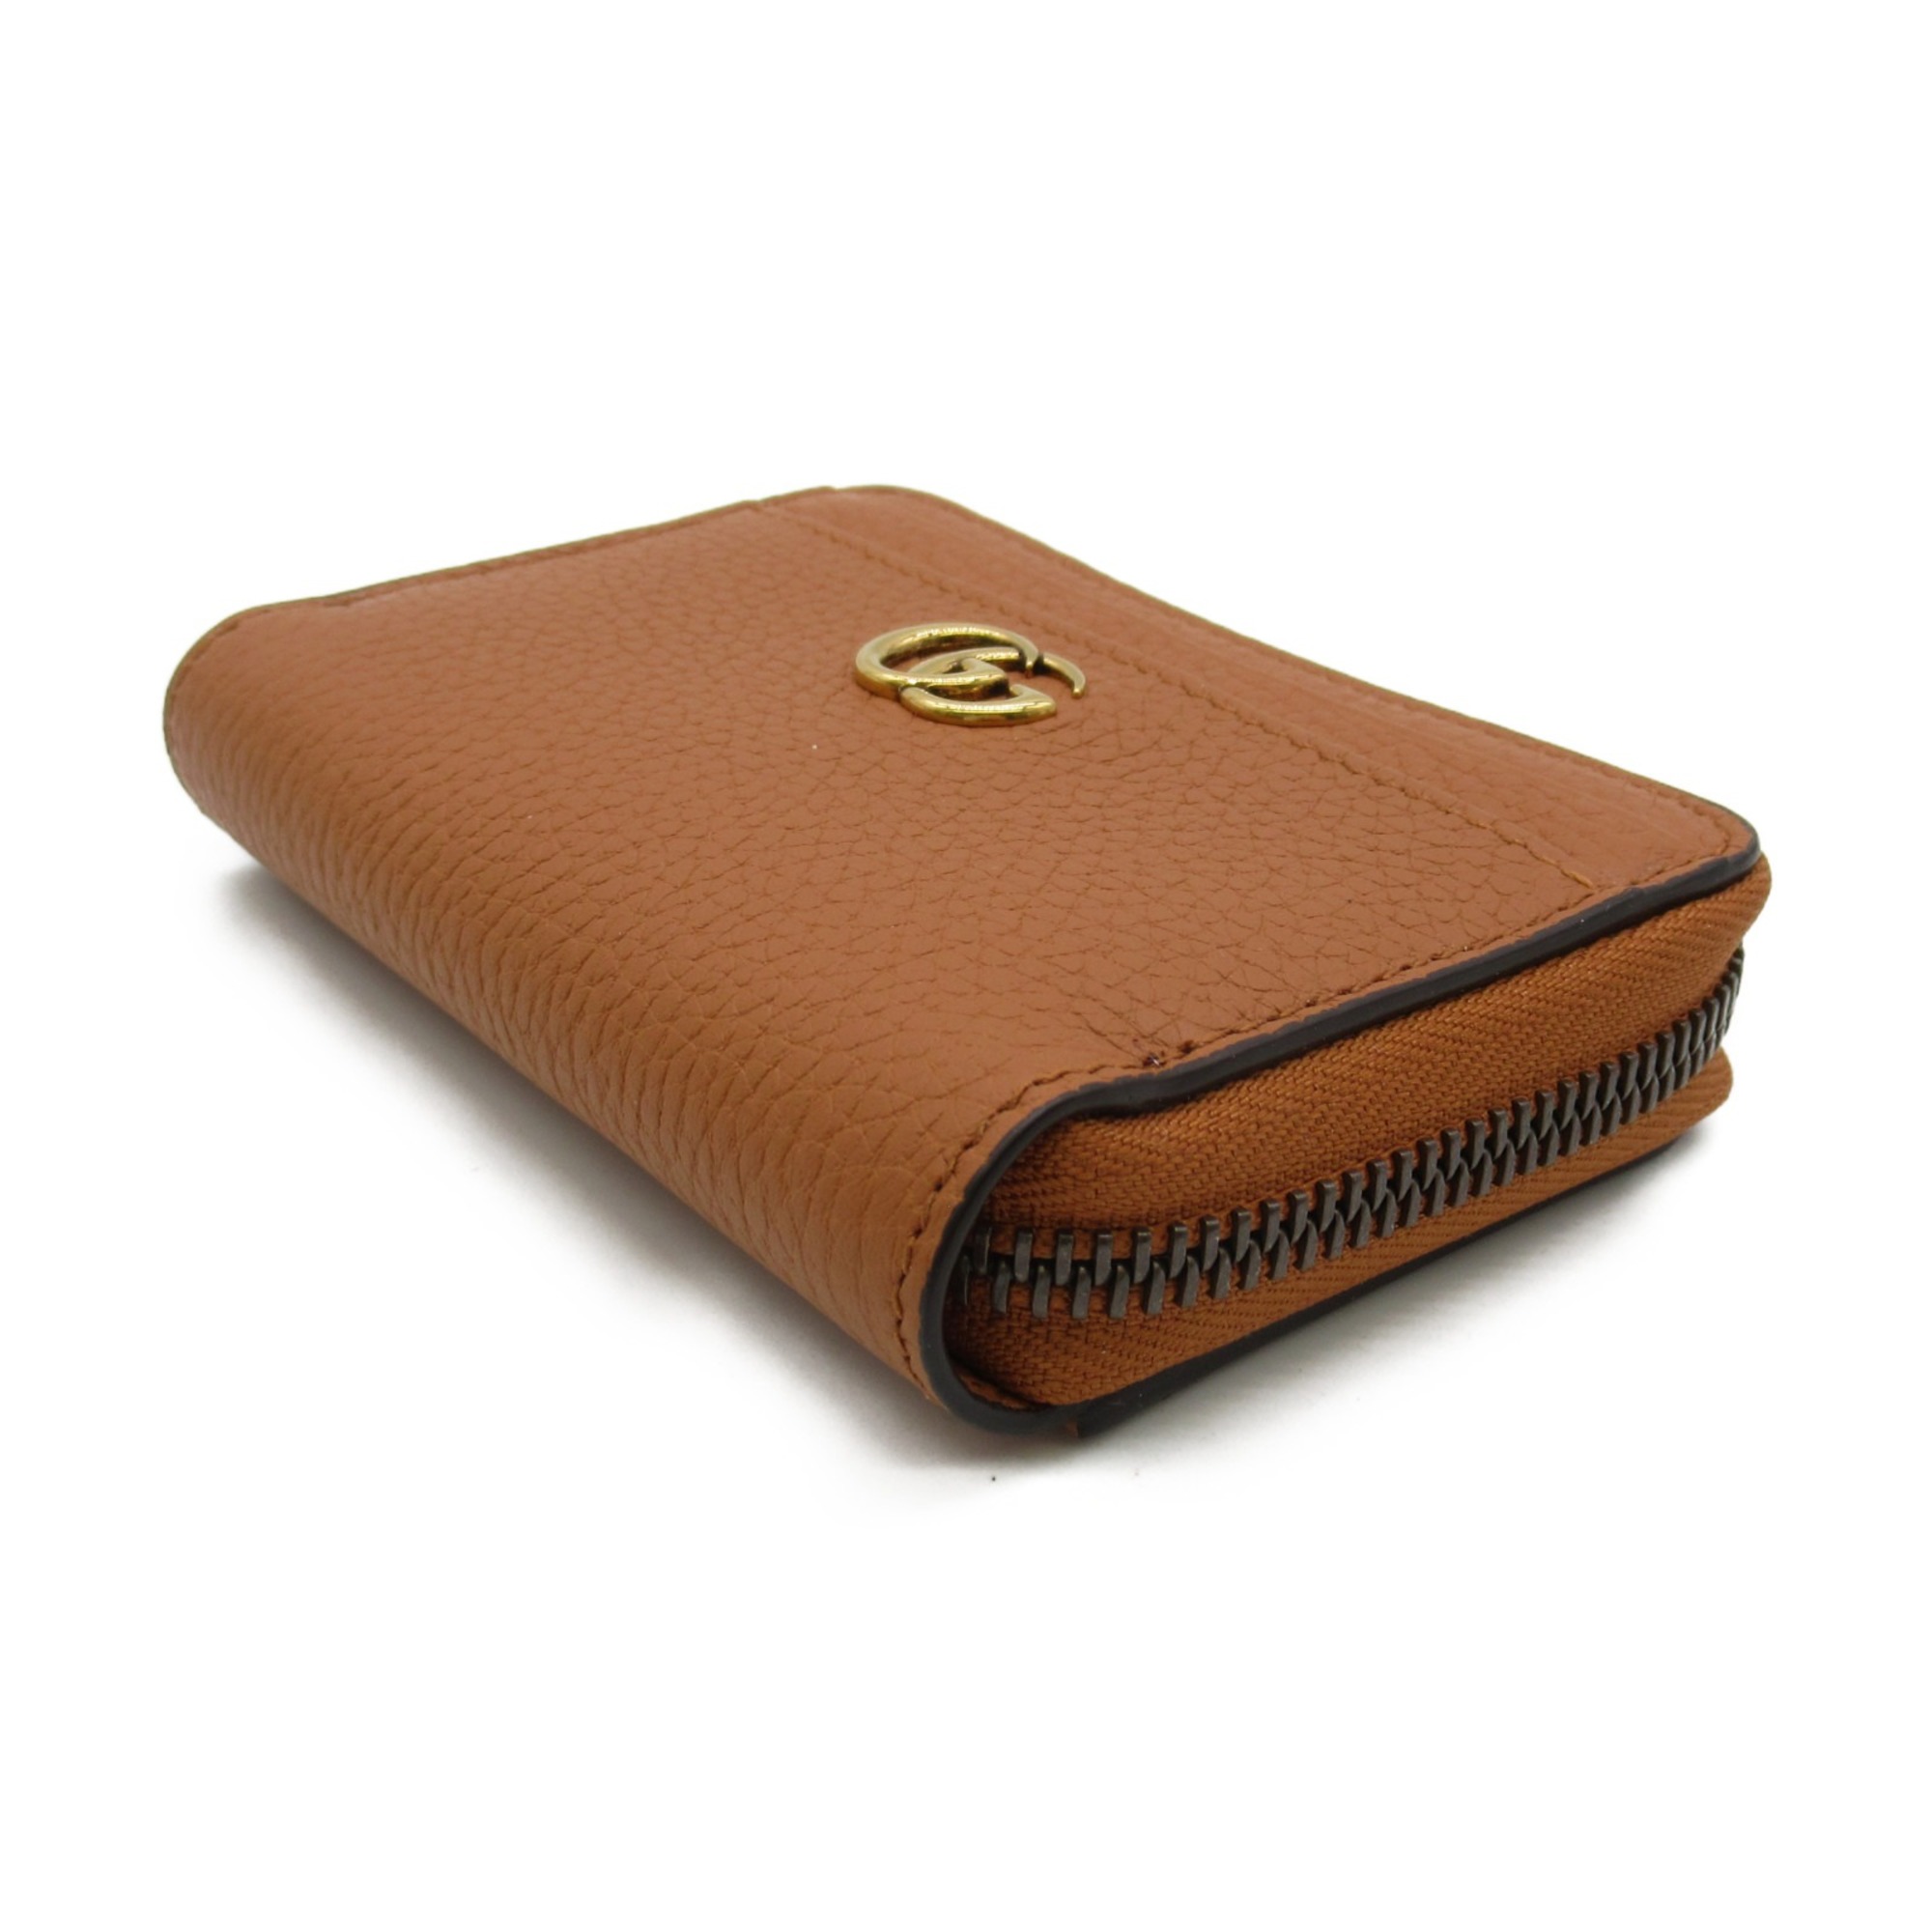 GUCCI coin purse Brown leather 739500AABXM2176